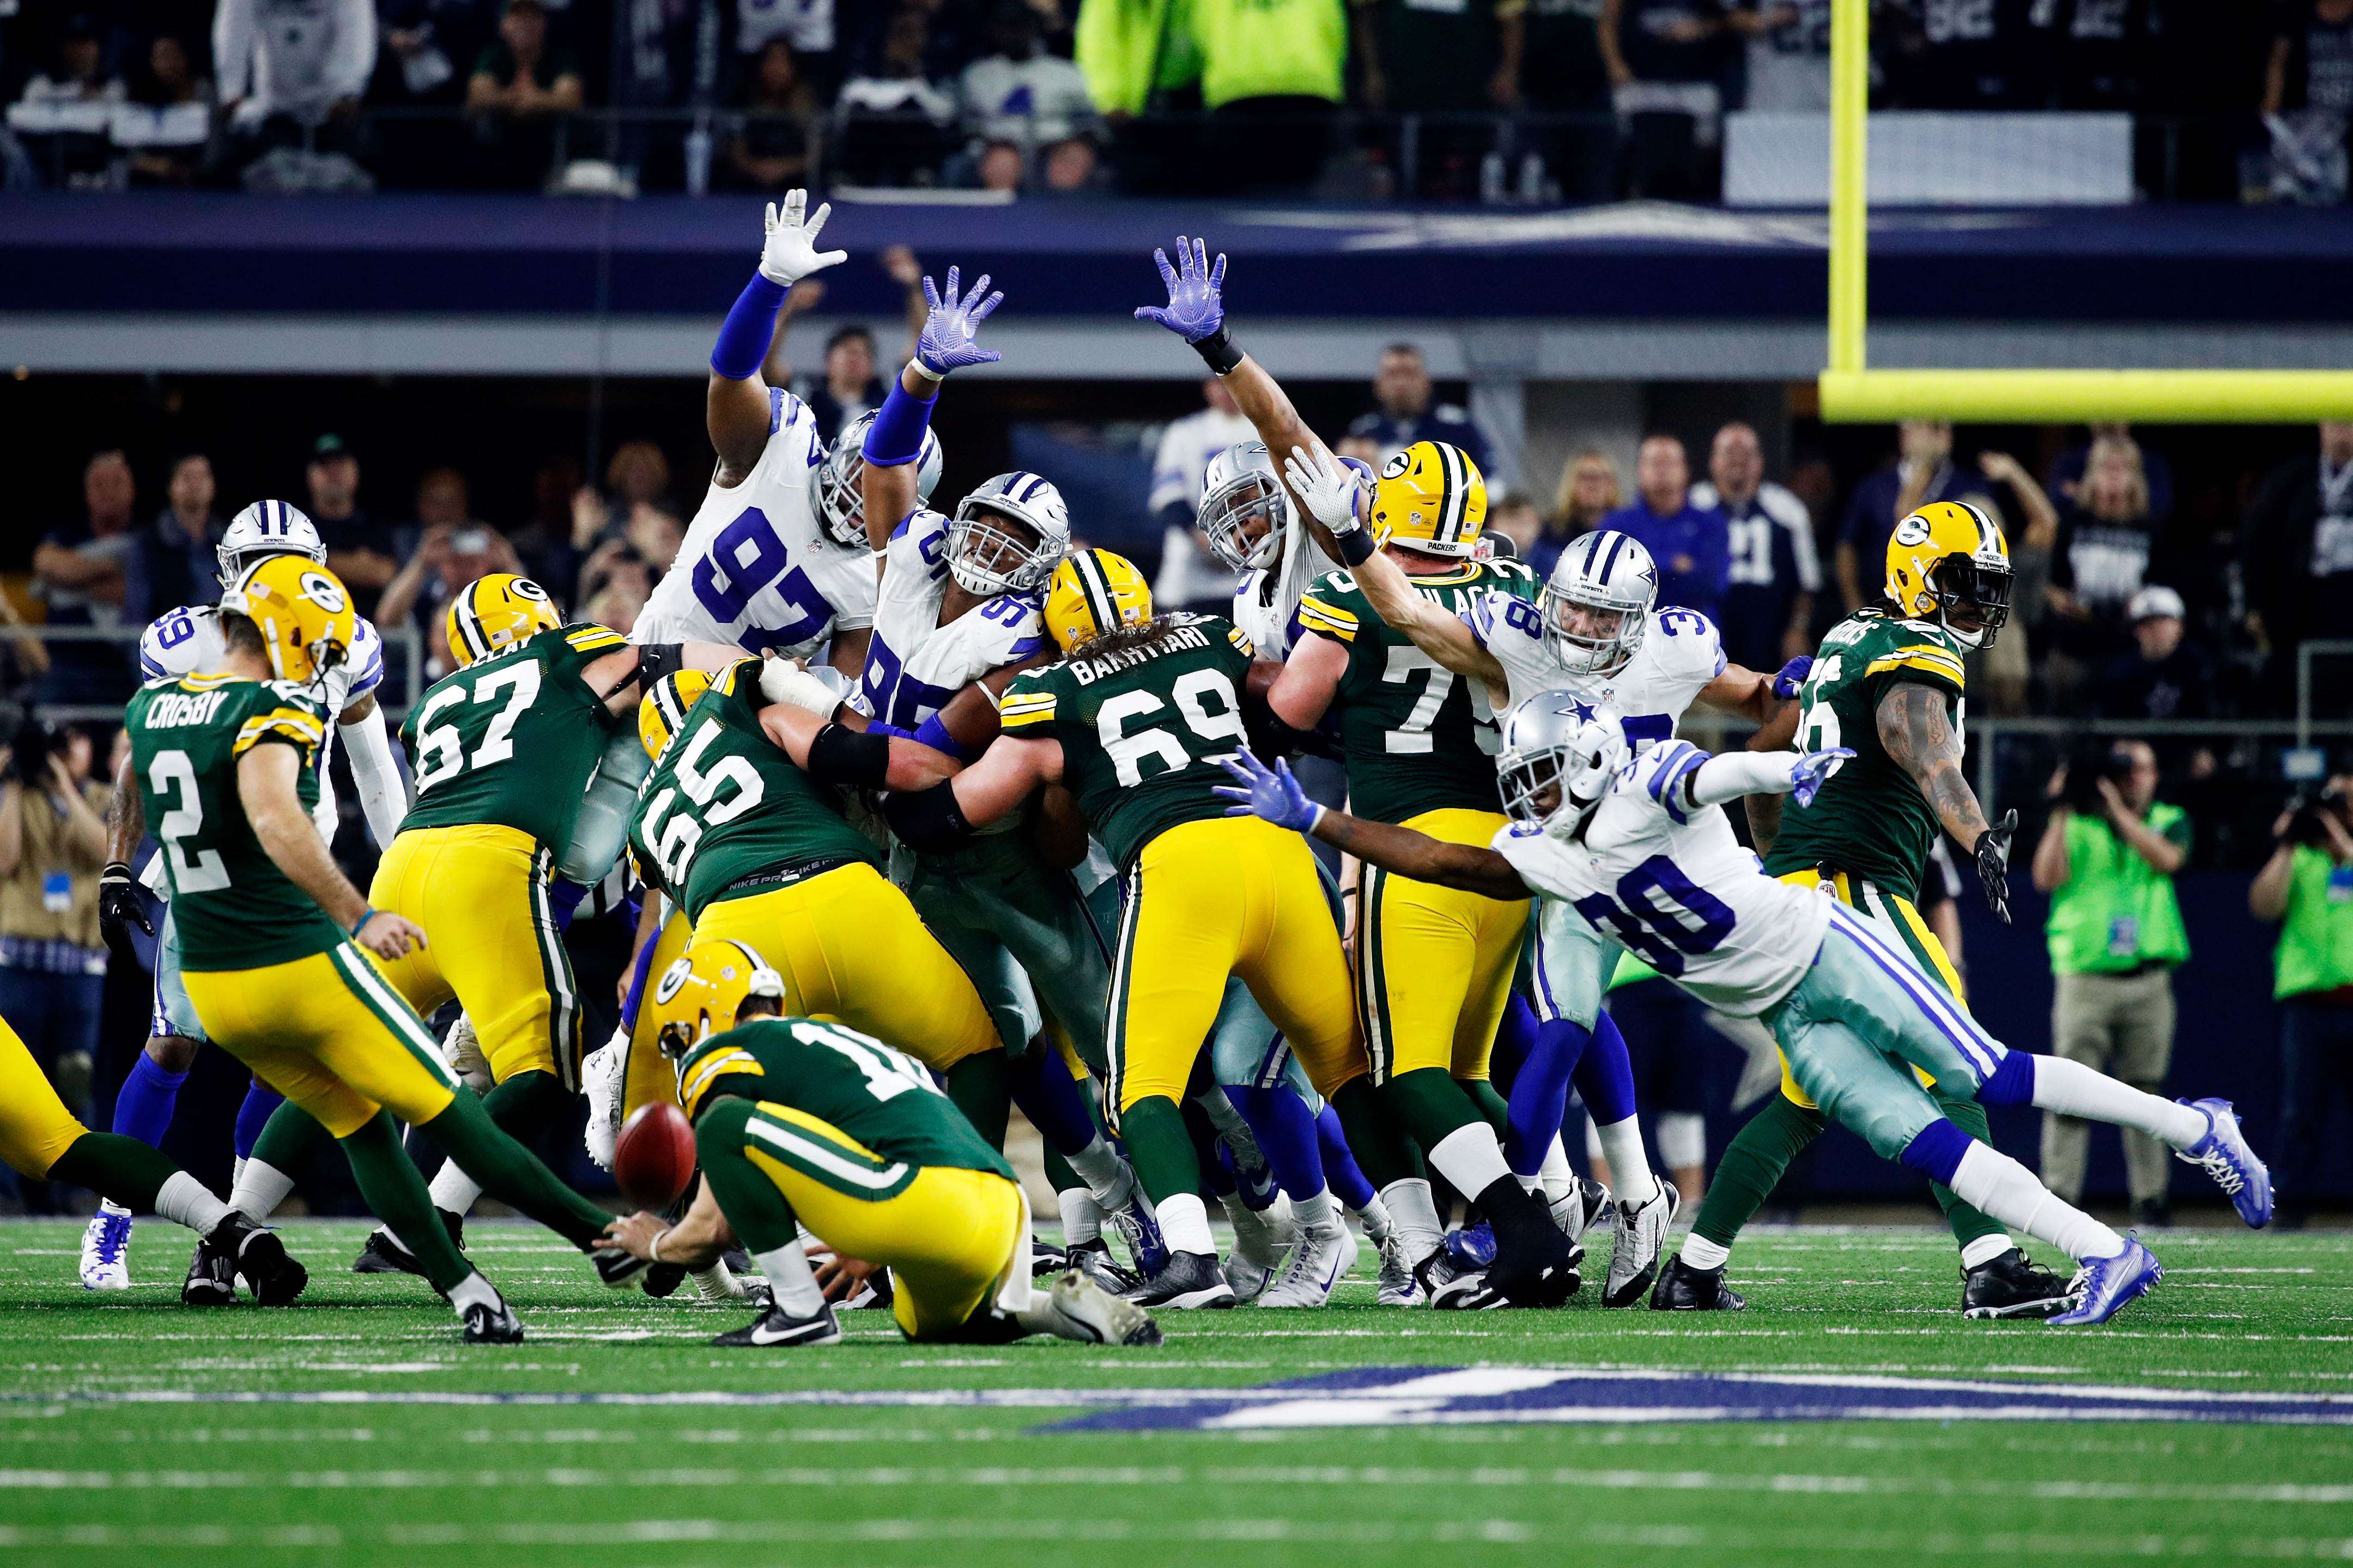 Mason Crosby (2) of the Green Bay Packers kicks a field goal to beat the Dallas Cowboys 34-31 in the NFC divisional play-offs. Photo: AFP